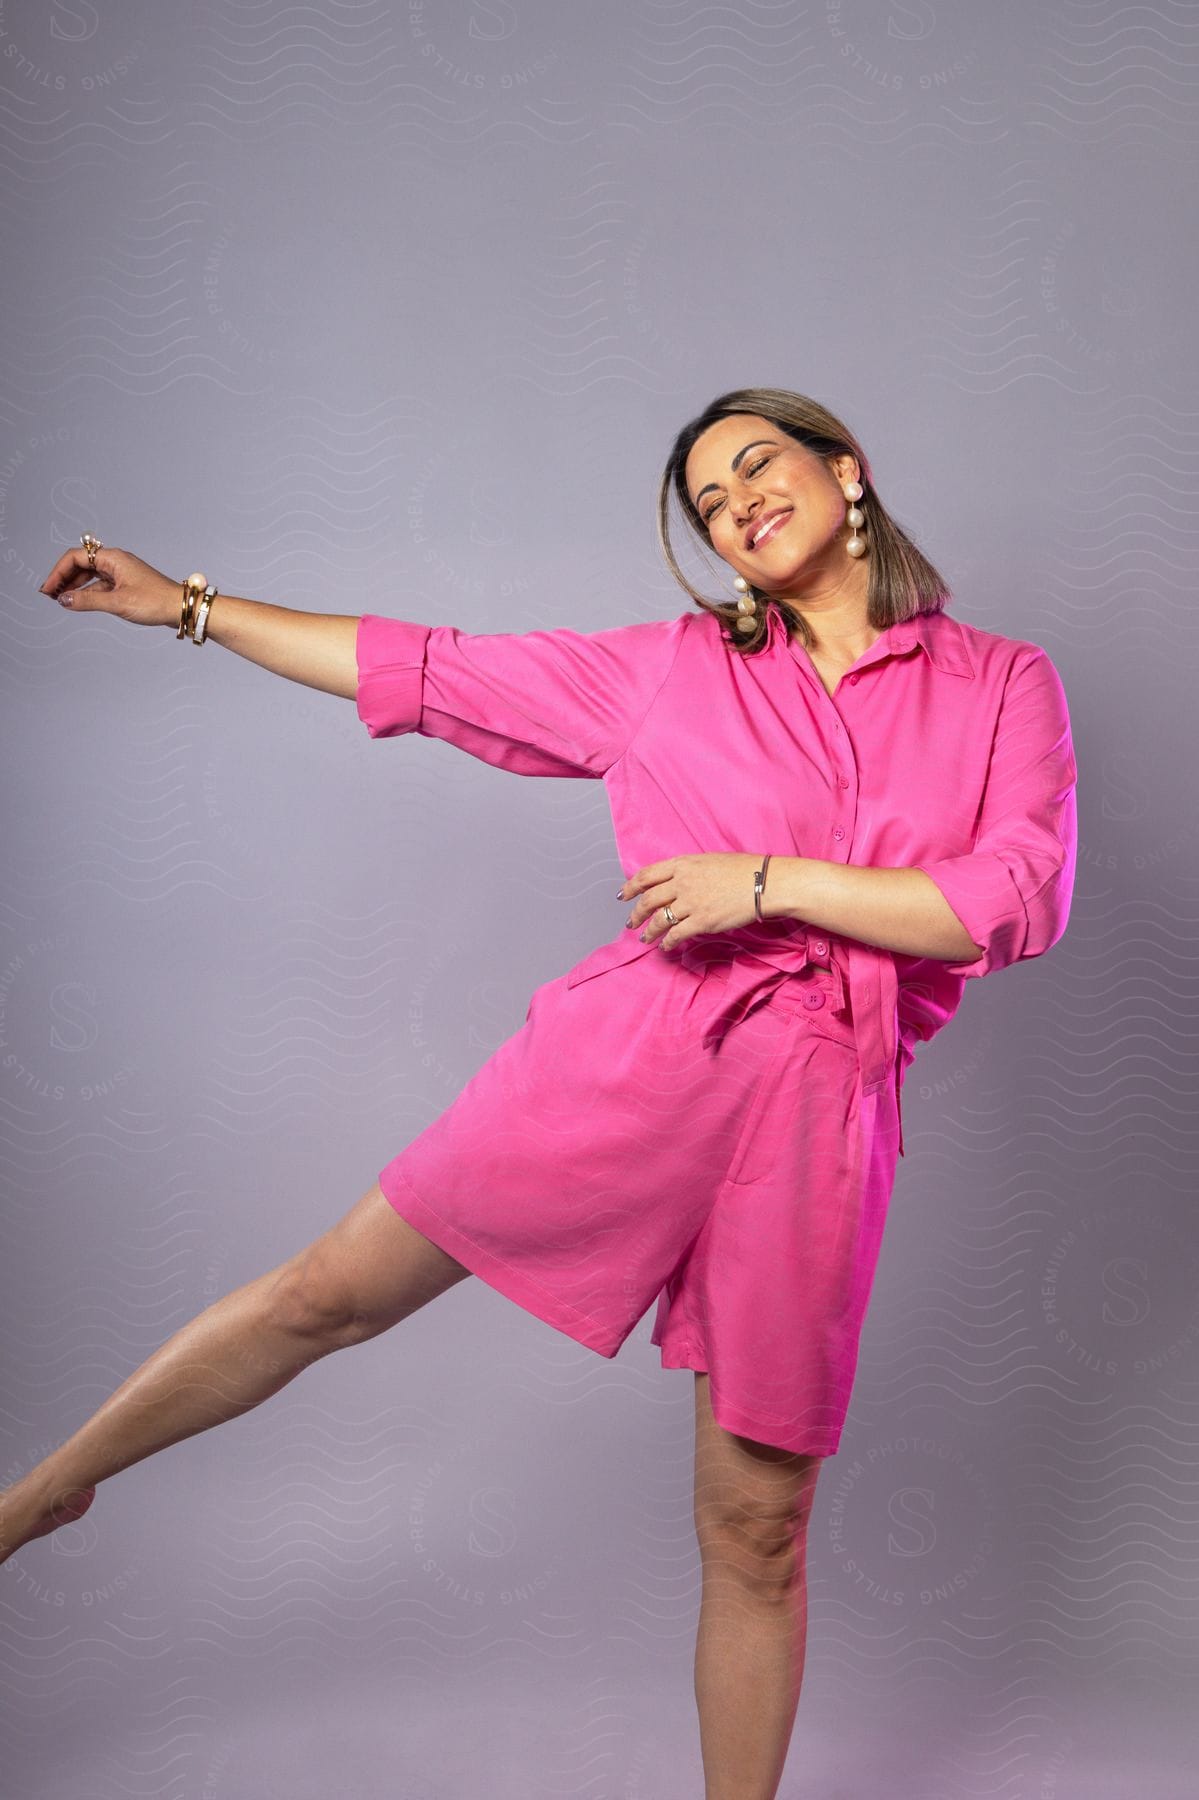 Stock photo of a smiling woman wearing a pink jumpsuit during a photo shoot.